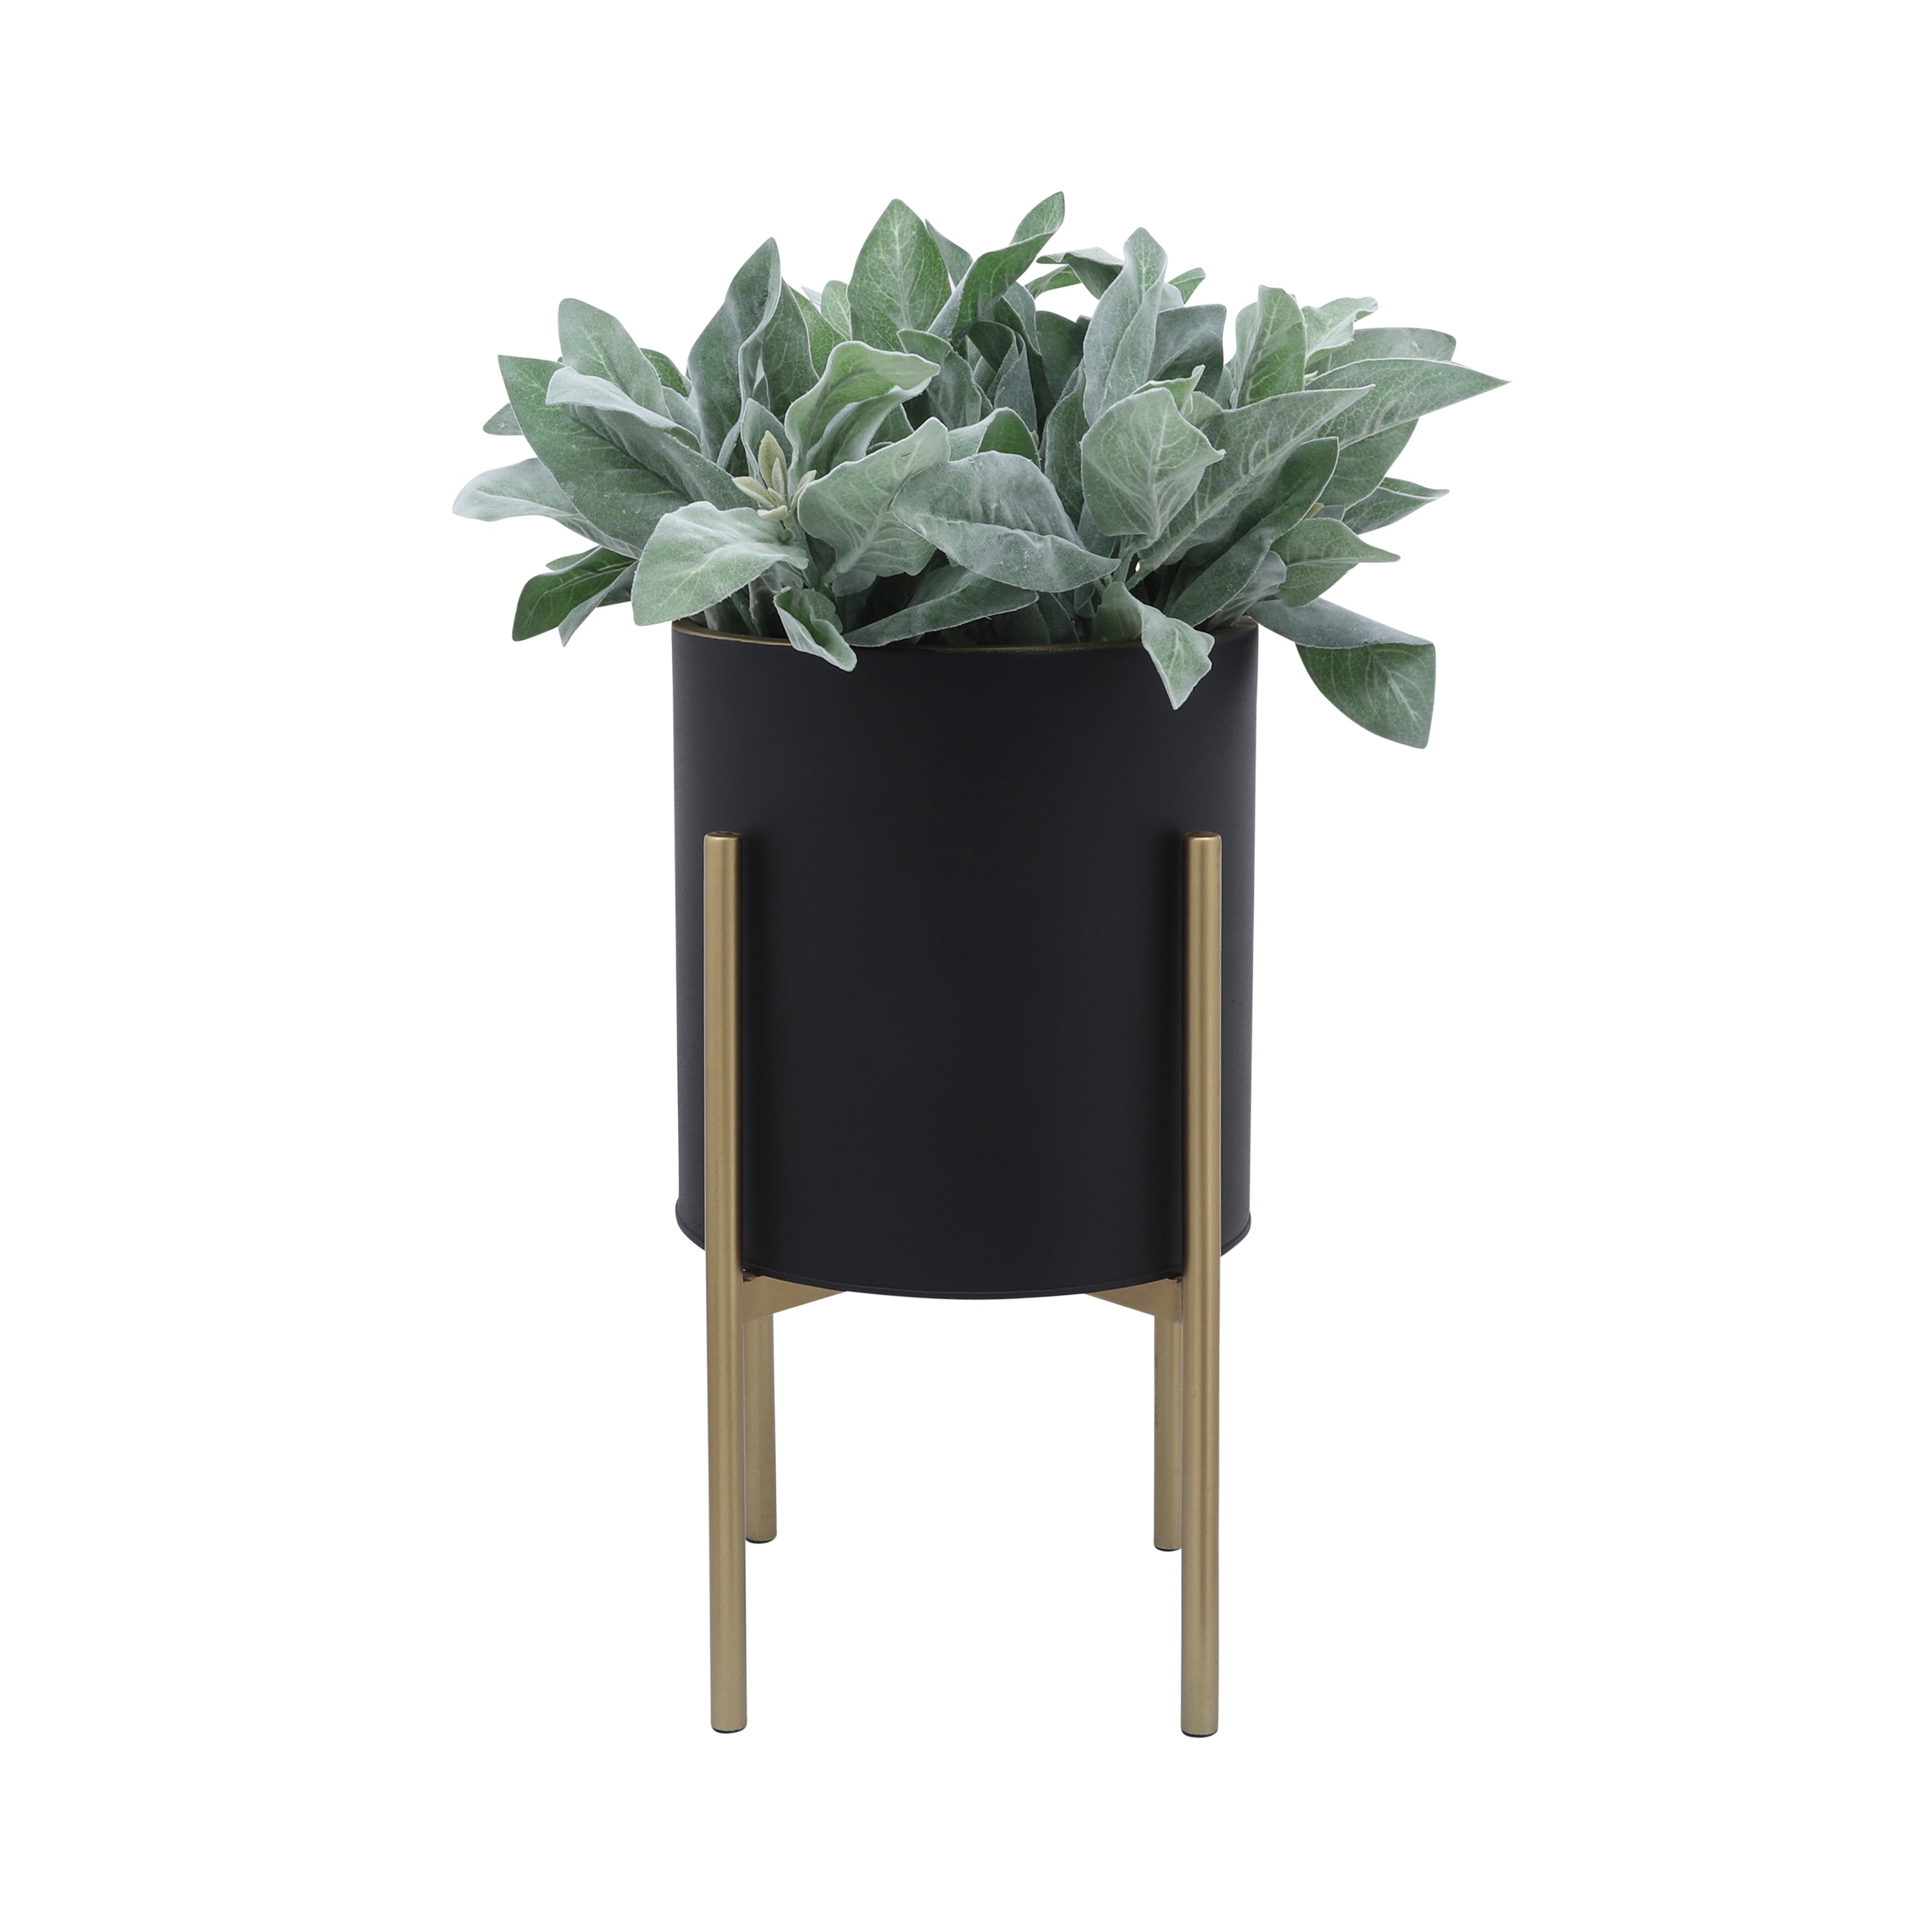 Set of 2 Planters On Metal Stand, Black/Gold, Planters